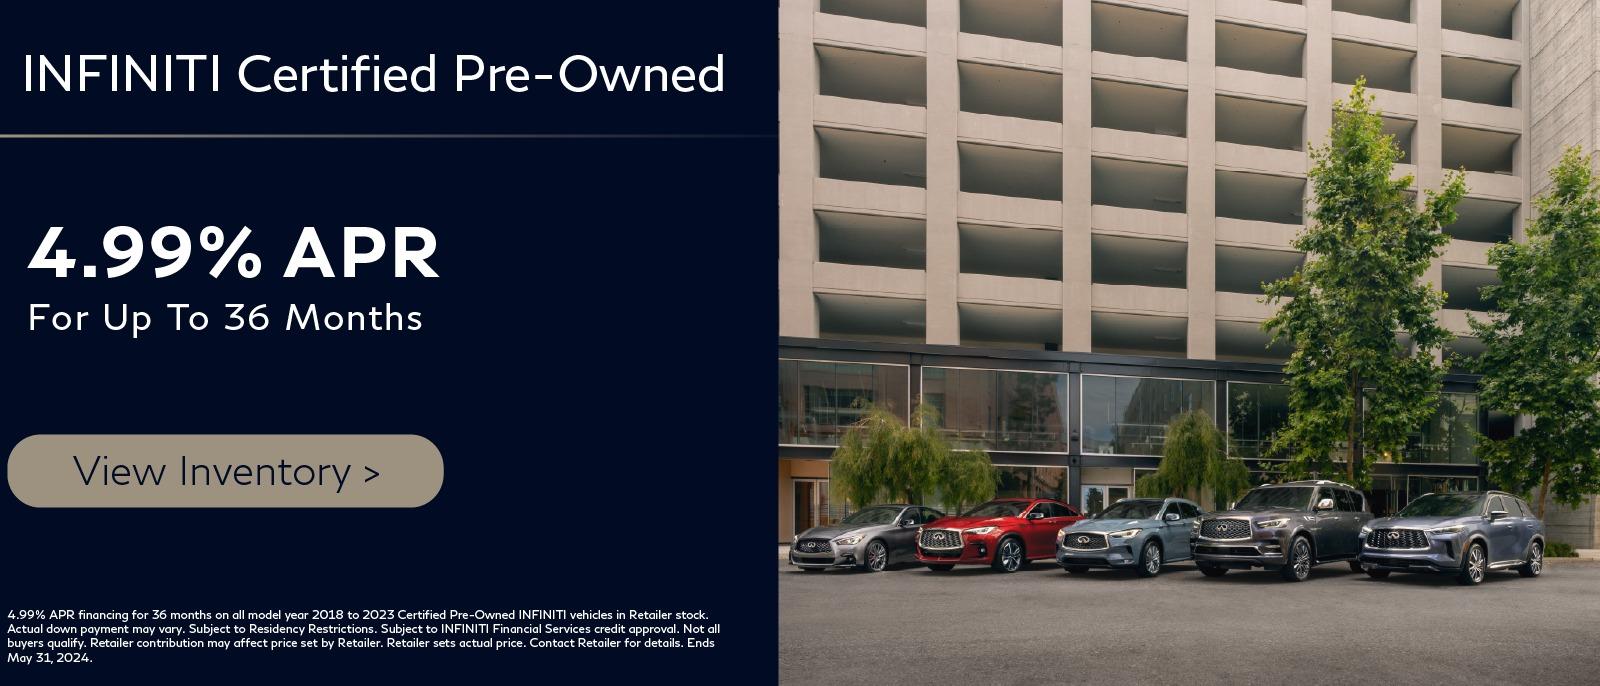 Infiniti Certified Pre-Owned 4.99%APR for up to 36 months